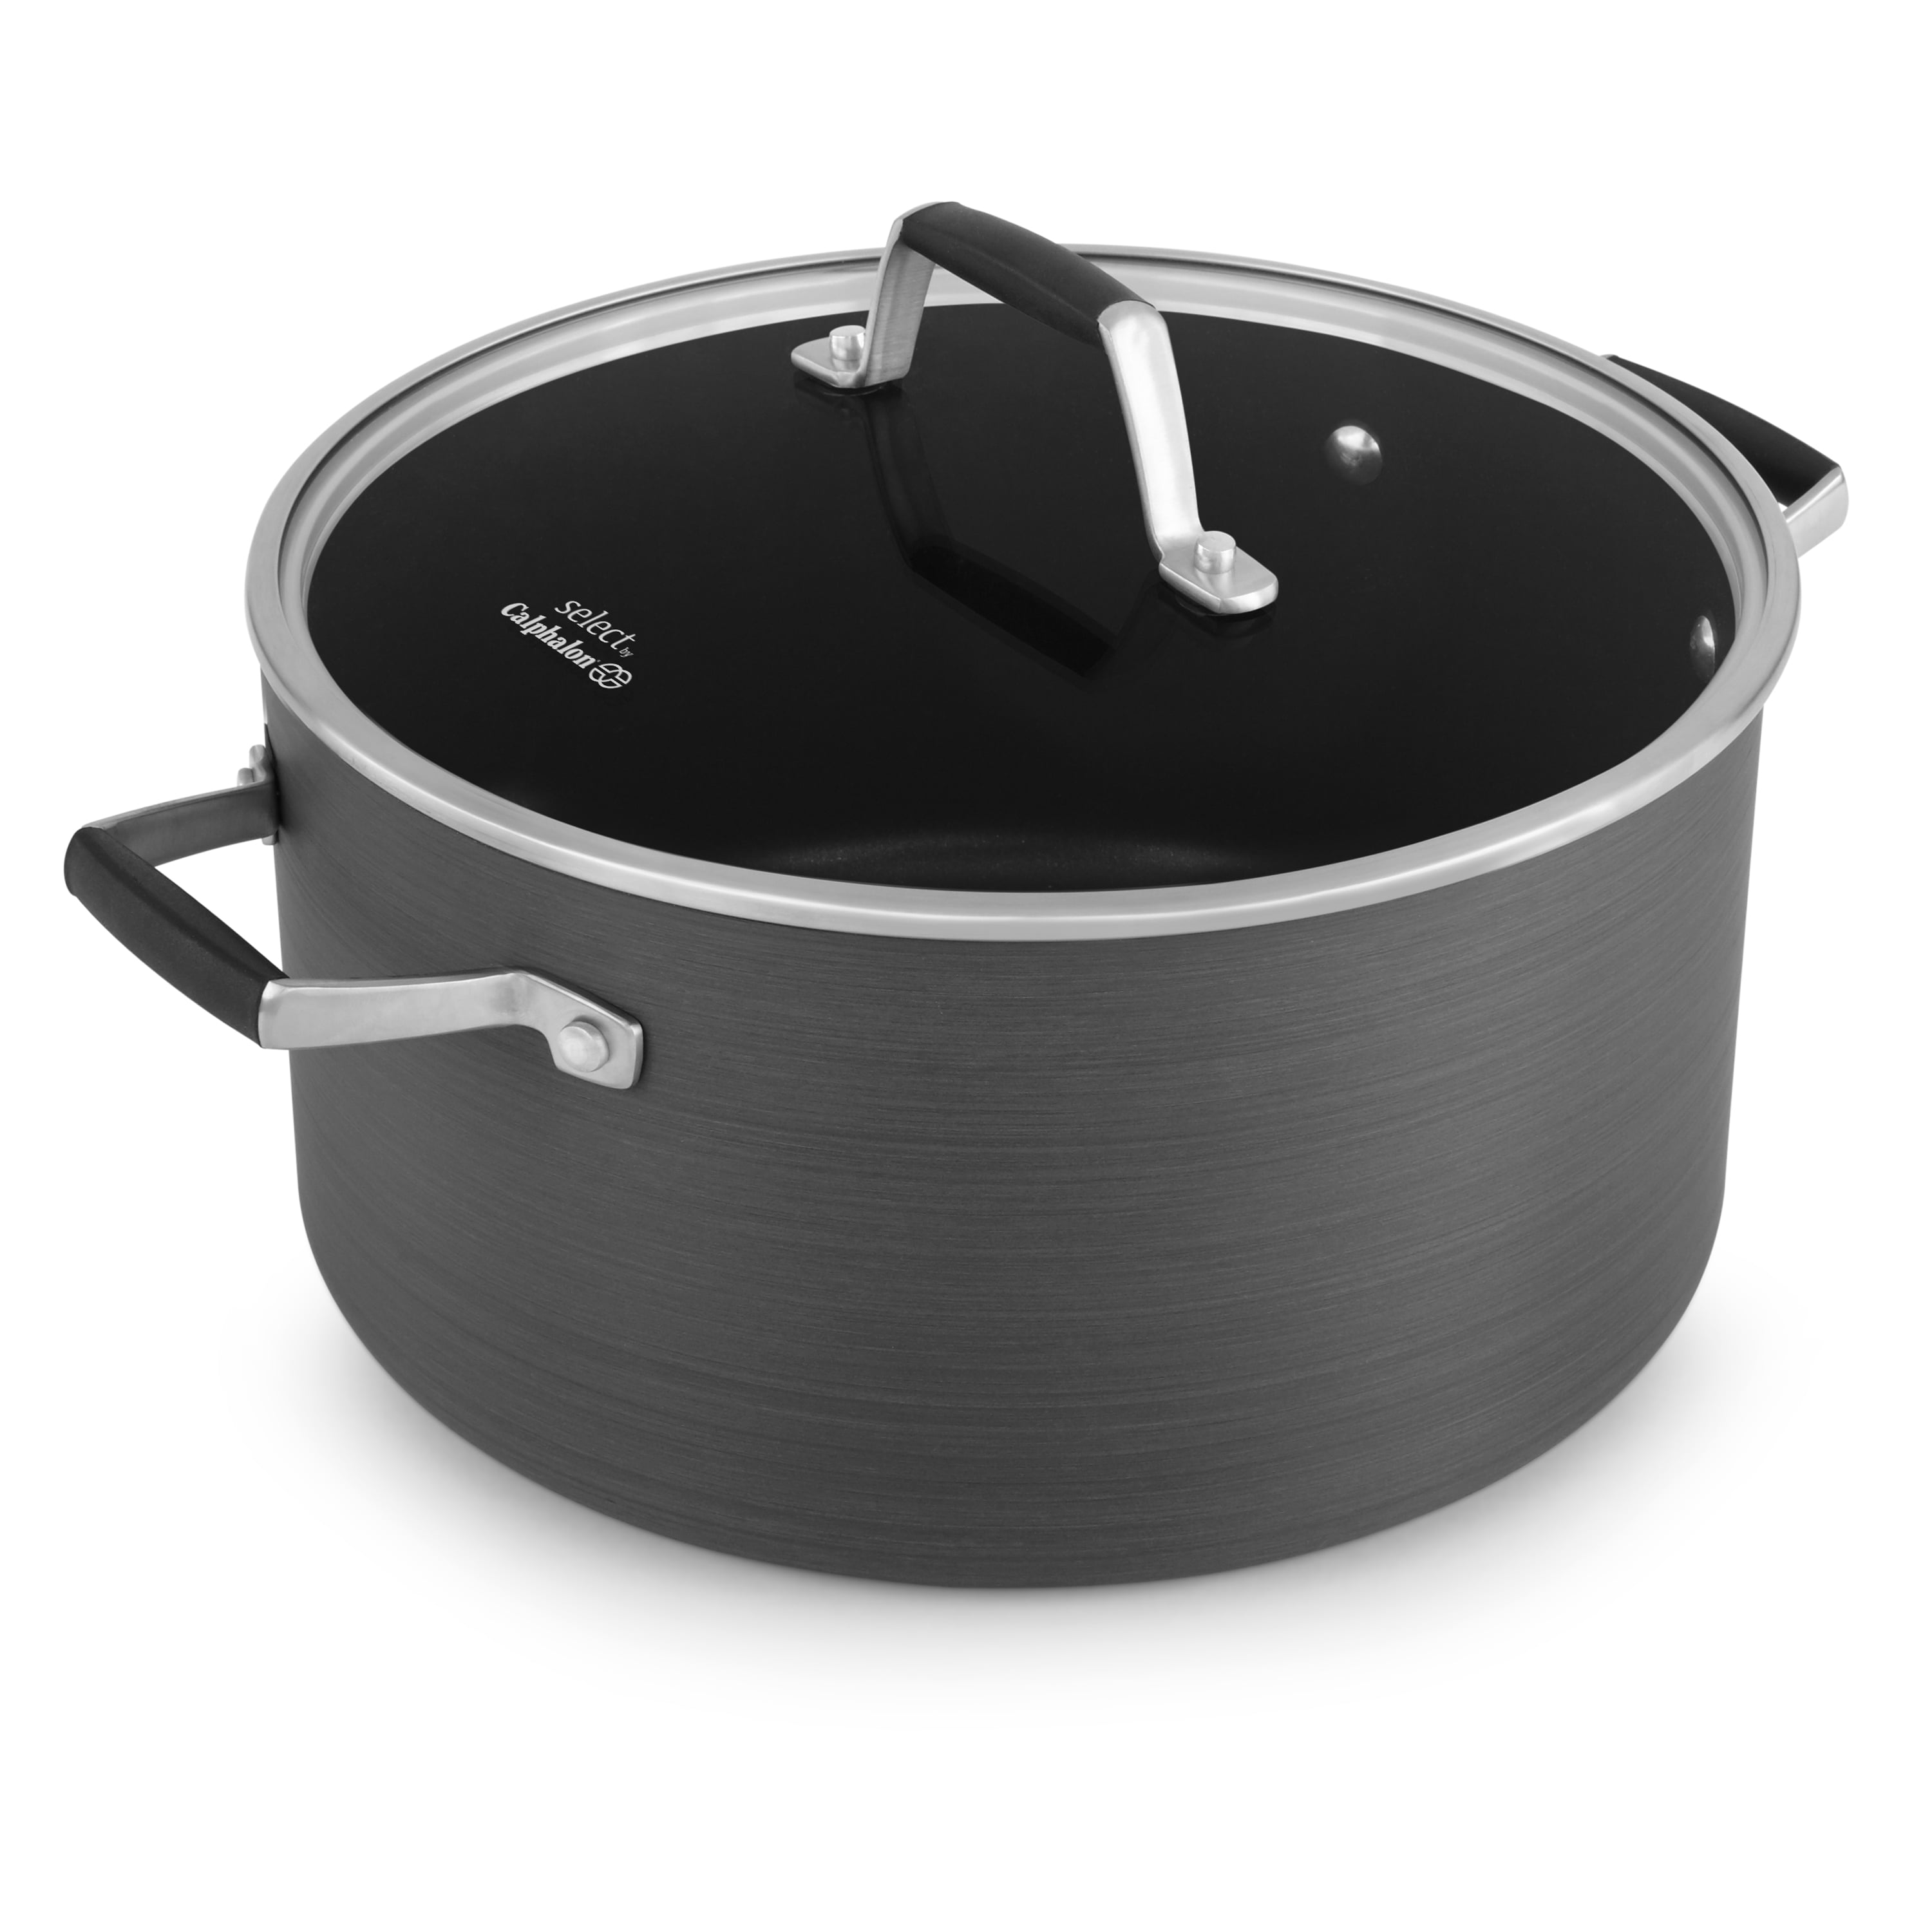 Simply Calphalon 5 Quart Cooker/Stock Pot/Covered Pan/Dutch Oven With Lid  USA